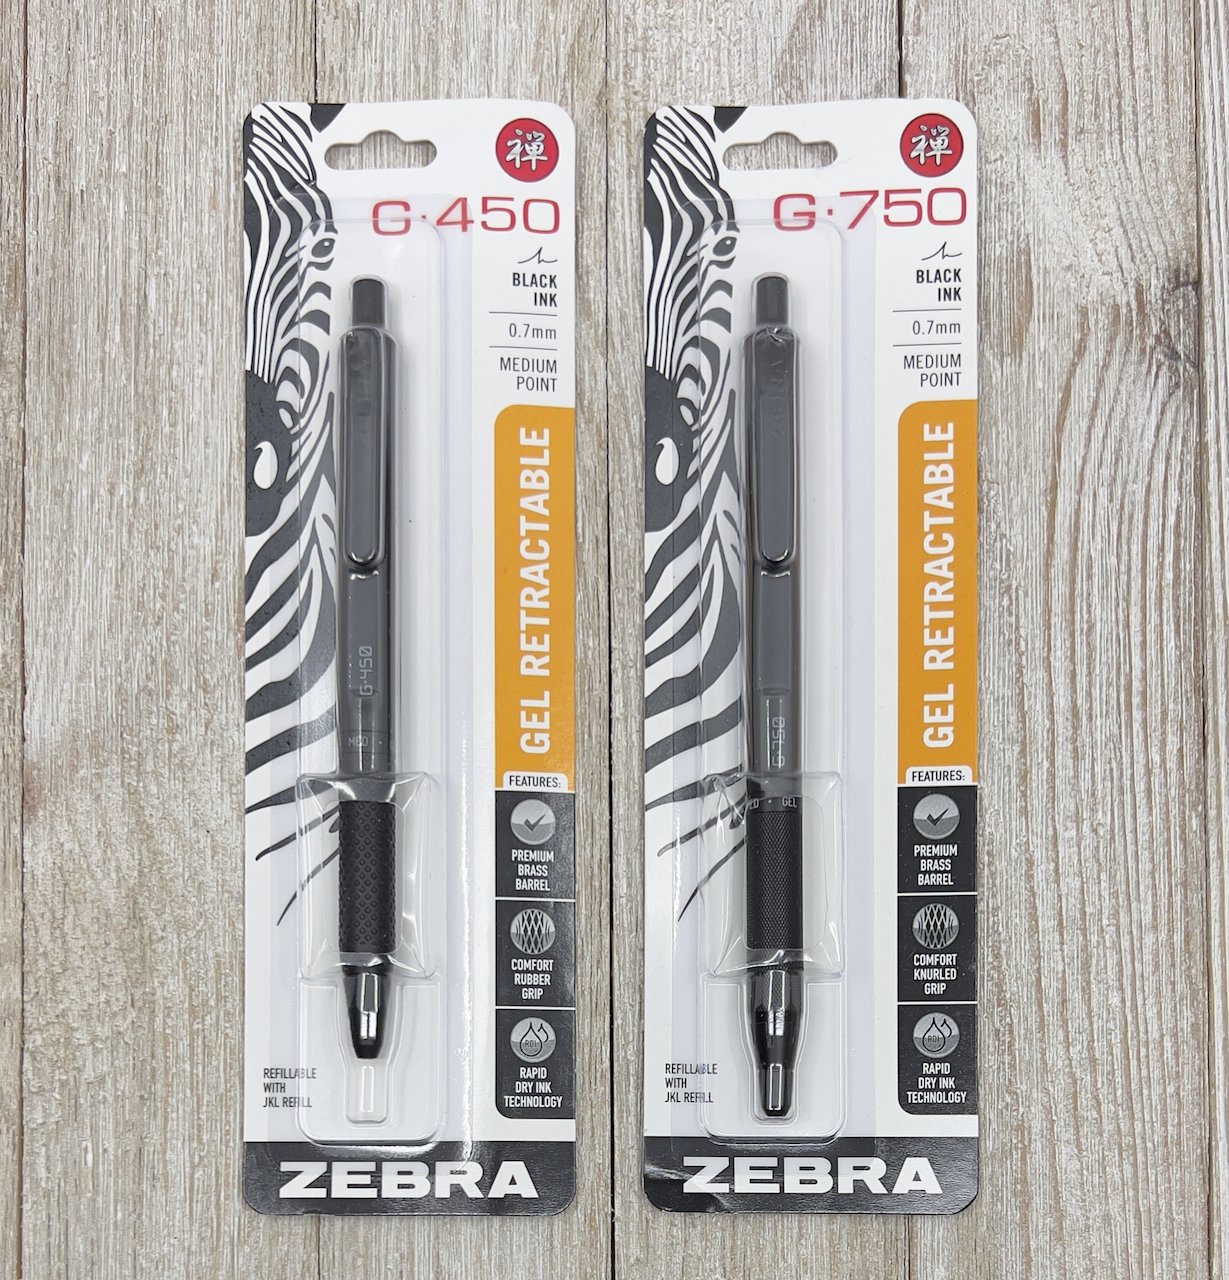 Zebra G-450 and G-750 Gel Ink Pen Review — The Pen Addict